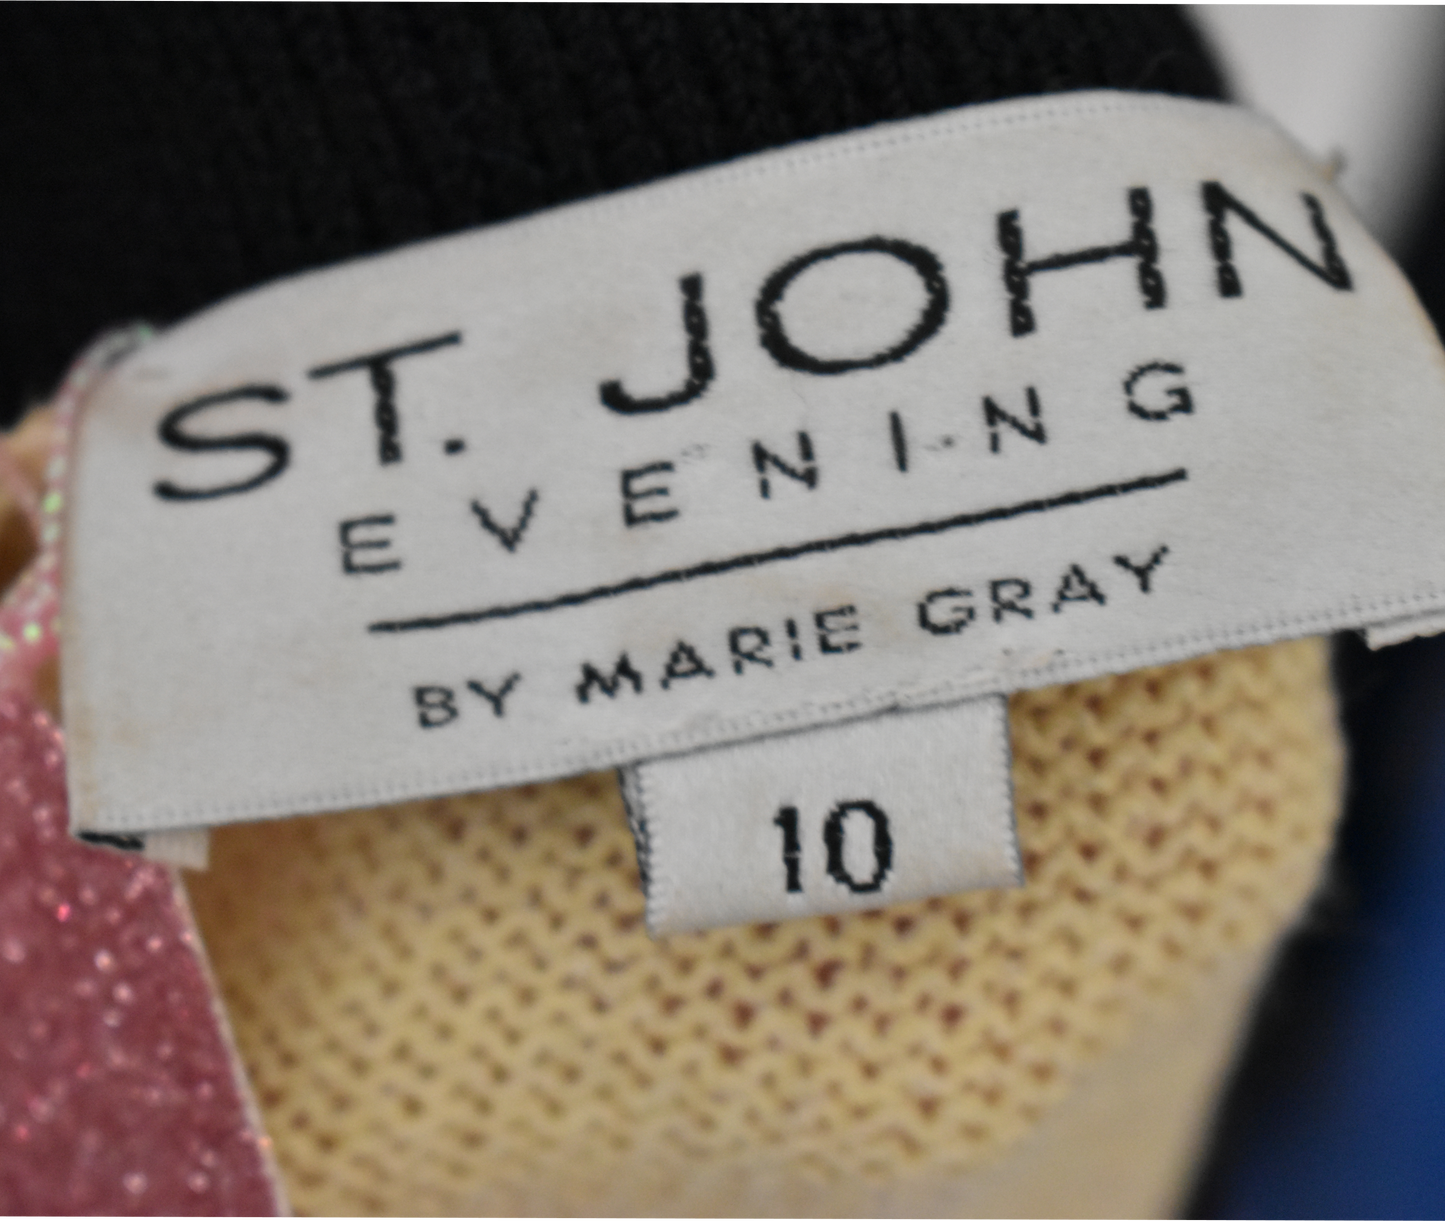 Vintage ST. John evening by marie Gray